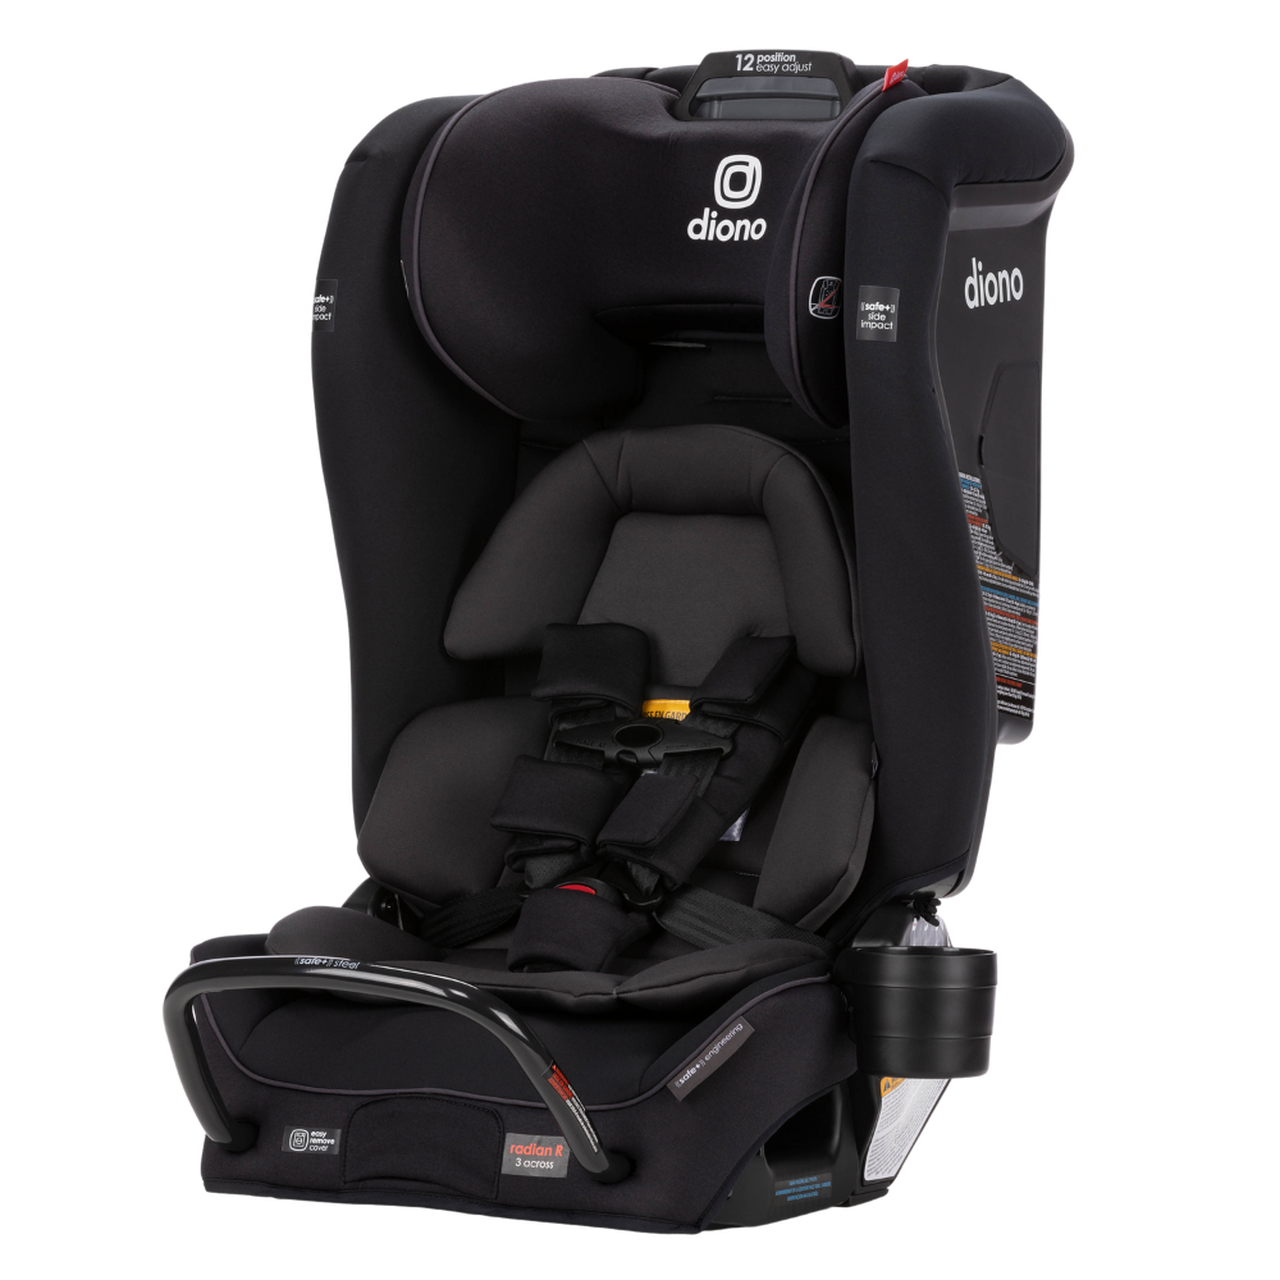 Child & Baby Car Seat Options - For Infants & Kids –